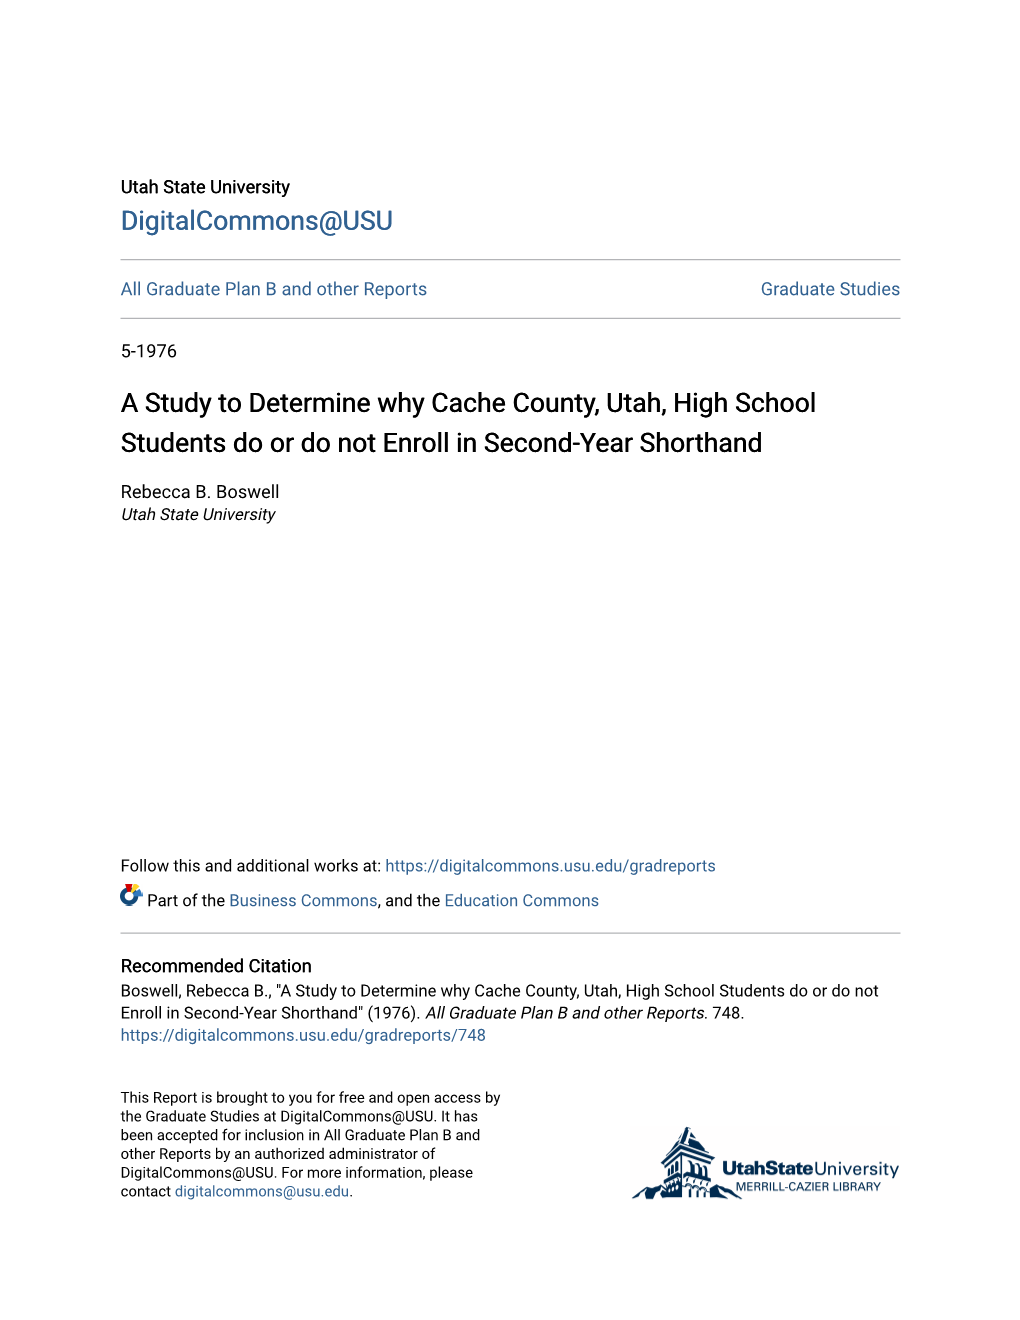 A Study to Determine Why Cache County, Utah, High School Students Do Or Do Not Enroll in Second-Year Shorthand